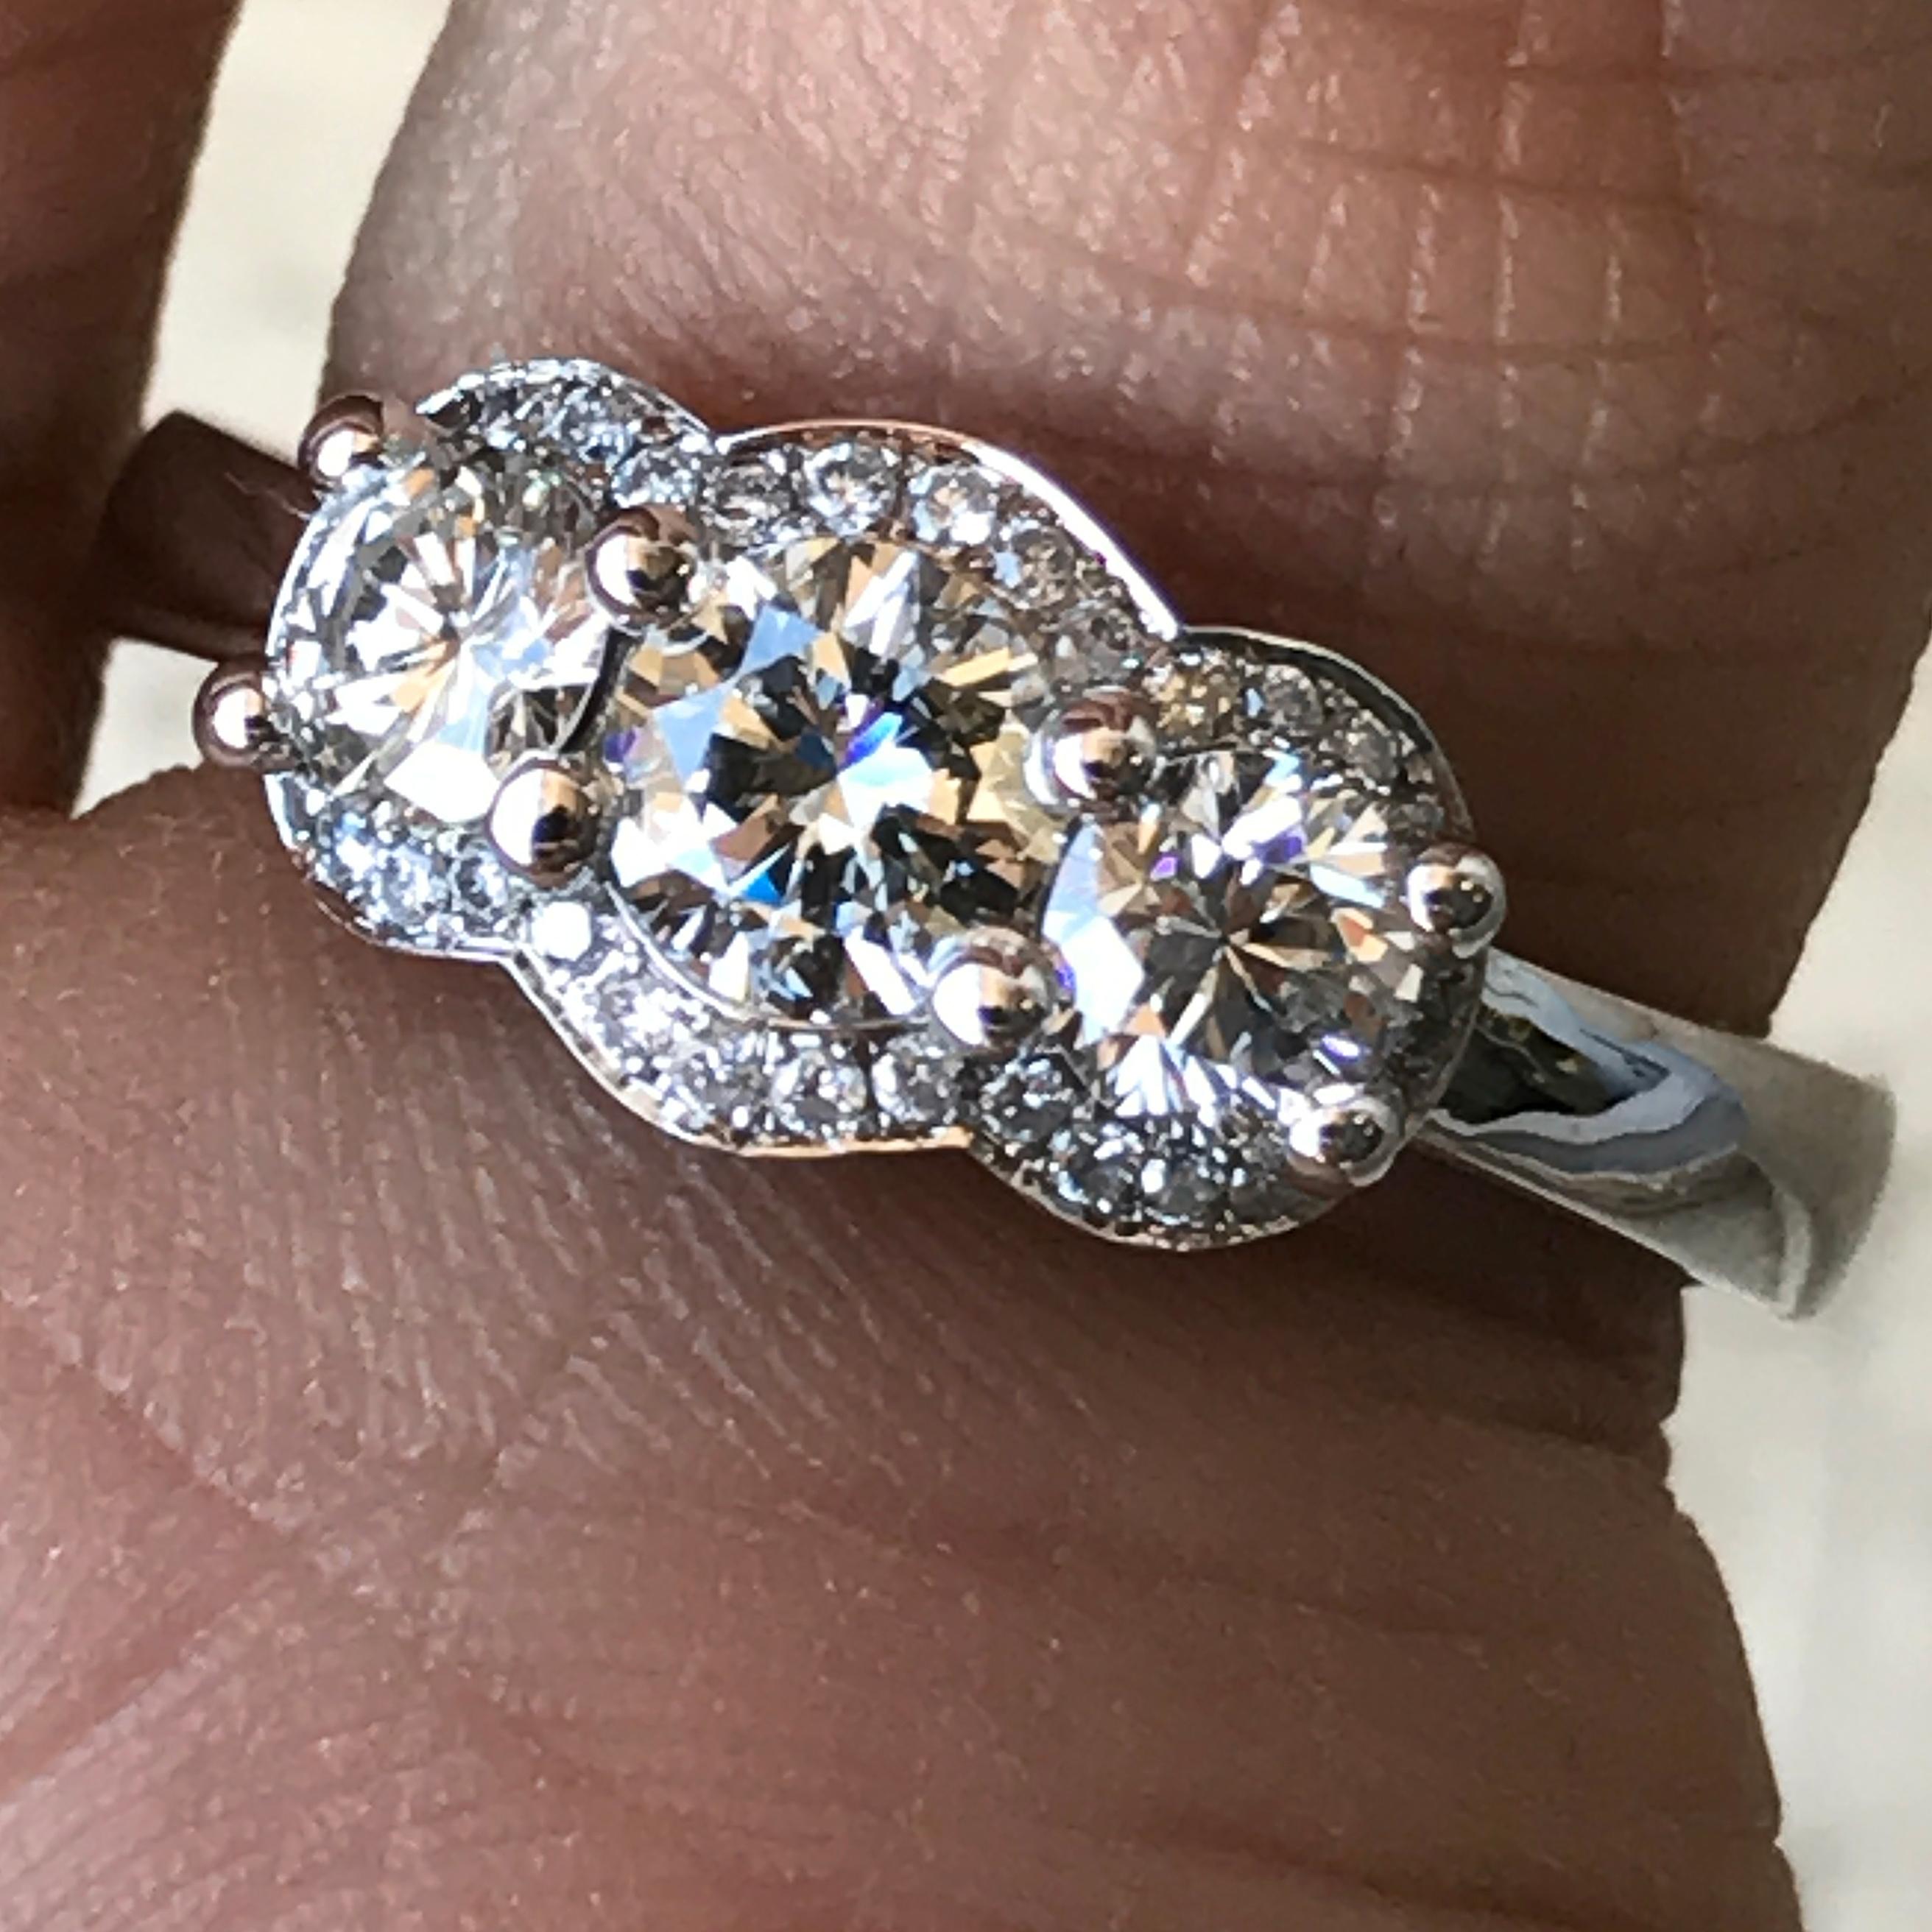 AS005-030005

Ring will be made to order and can be purchased without the center stone. I can supply a different center stone to fit your budget if it is higher or lower. Will take approximately 3-6 business weeks.

Center Stone Diamond Details :